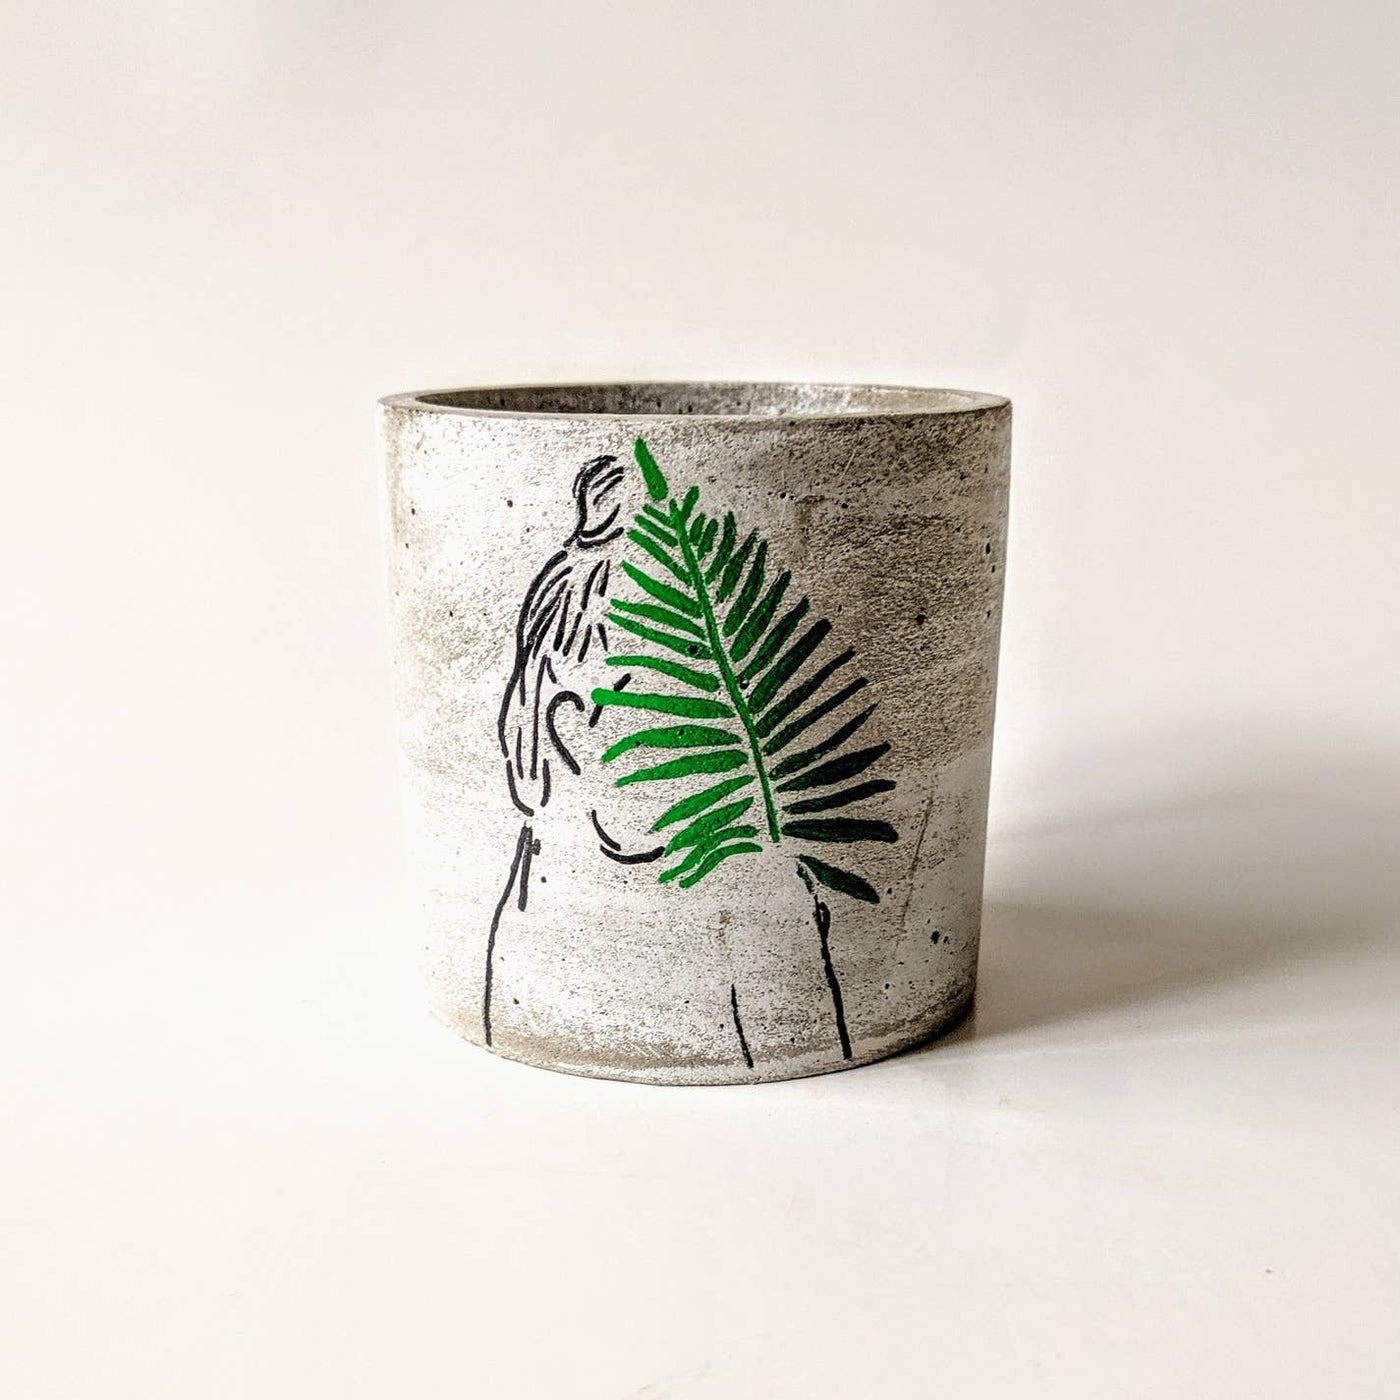 Concrete planter with hand painted silhouette of a woman from the side holding a leaf in green covering her face